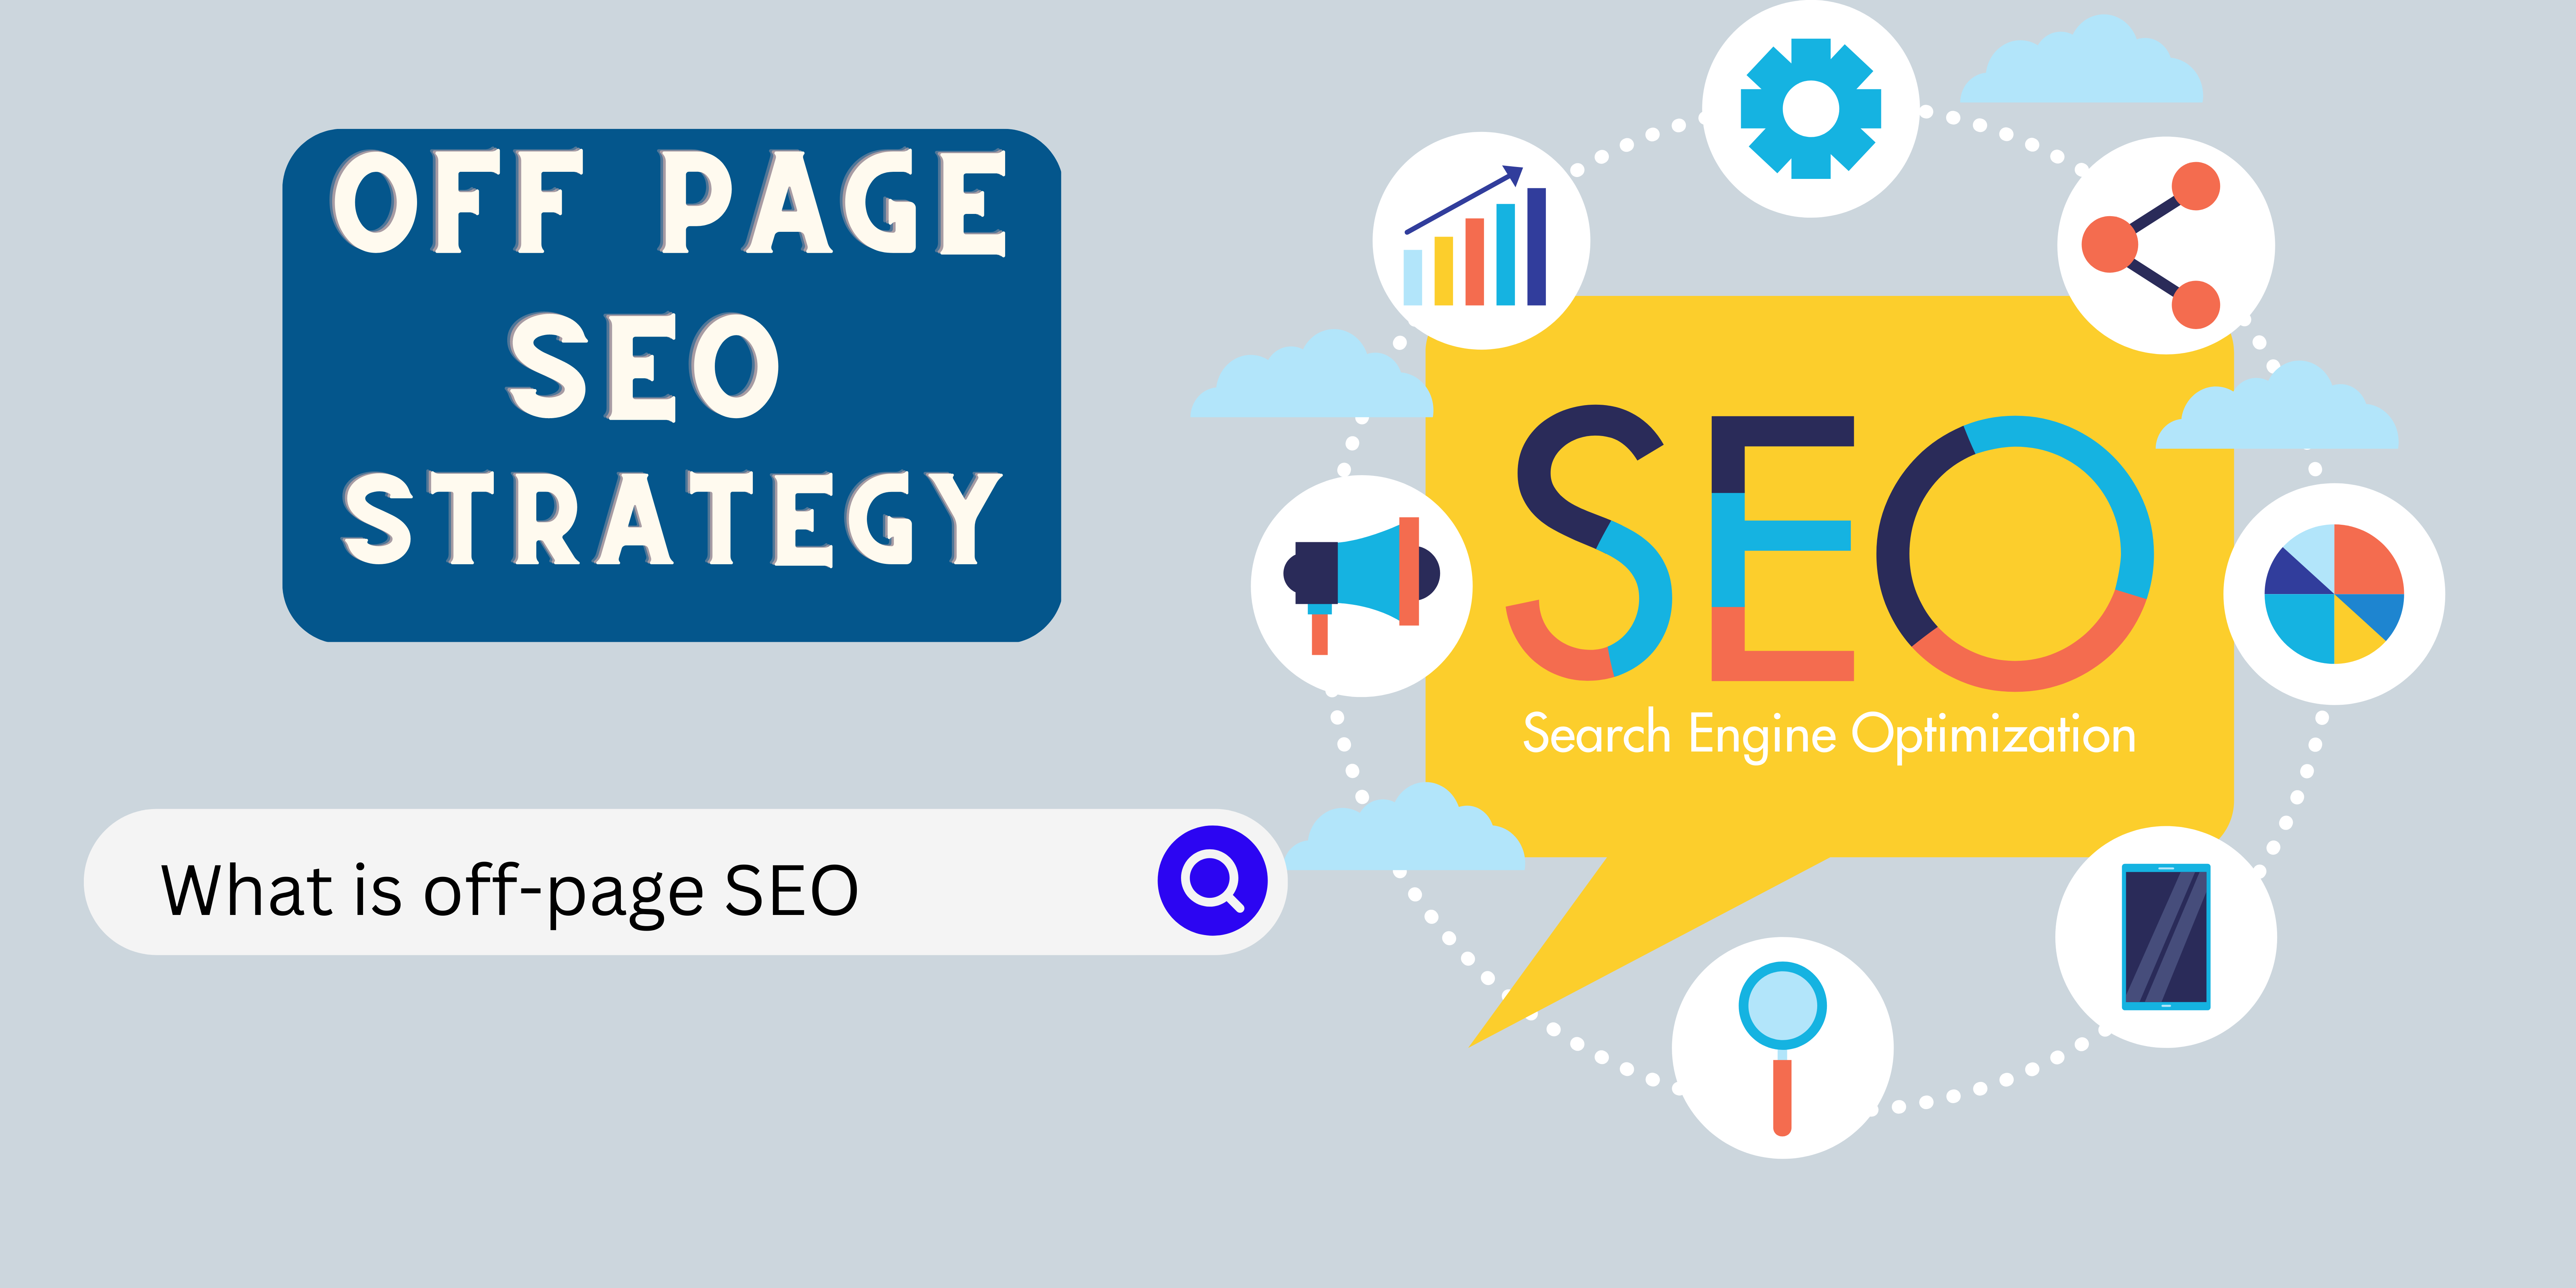 <p> <img src="SEO.jpg" alt="Off-page SEO Strategy for small businesses."> </p>